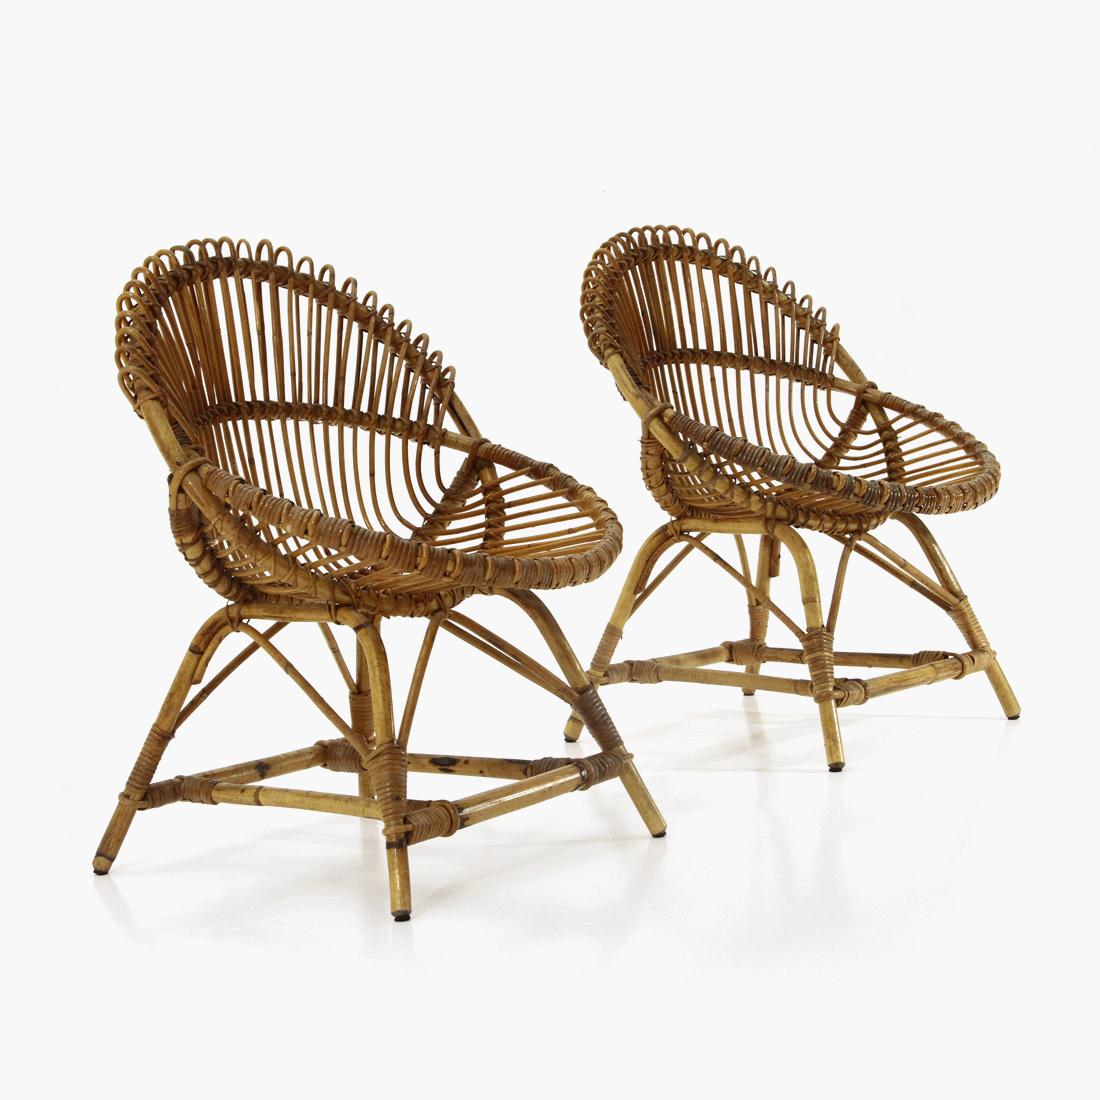 Pair of Italian-made armchairs made in the 1950s.
Body and legs in curved and woven rattan.
Good general condition, some signs due to normal use over time.

Dimensions: Length 60 cm, depth 60 cm, height 80 cm, seat height 40 cm.